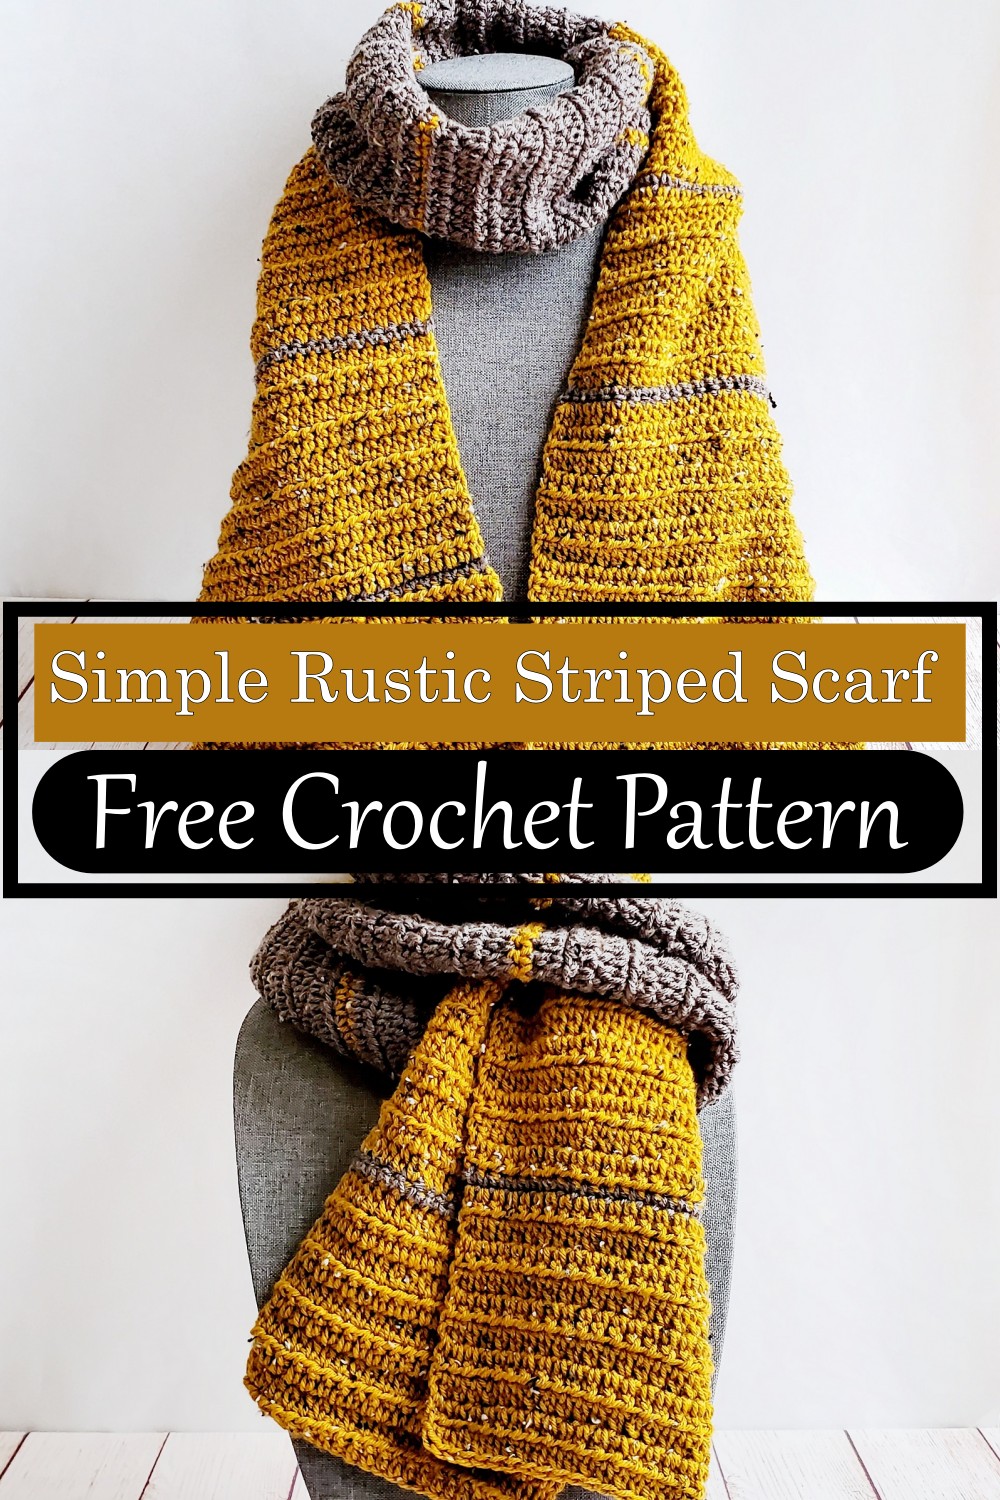 Simple Rustic Striped Scarf